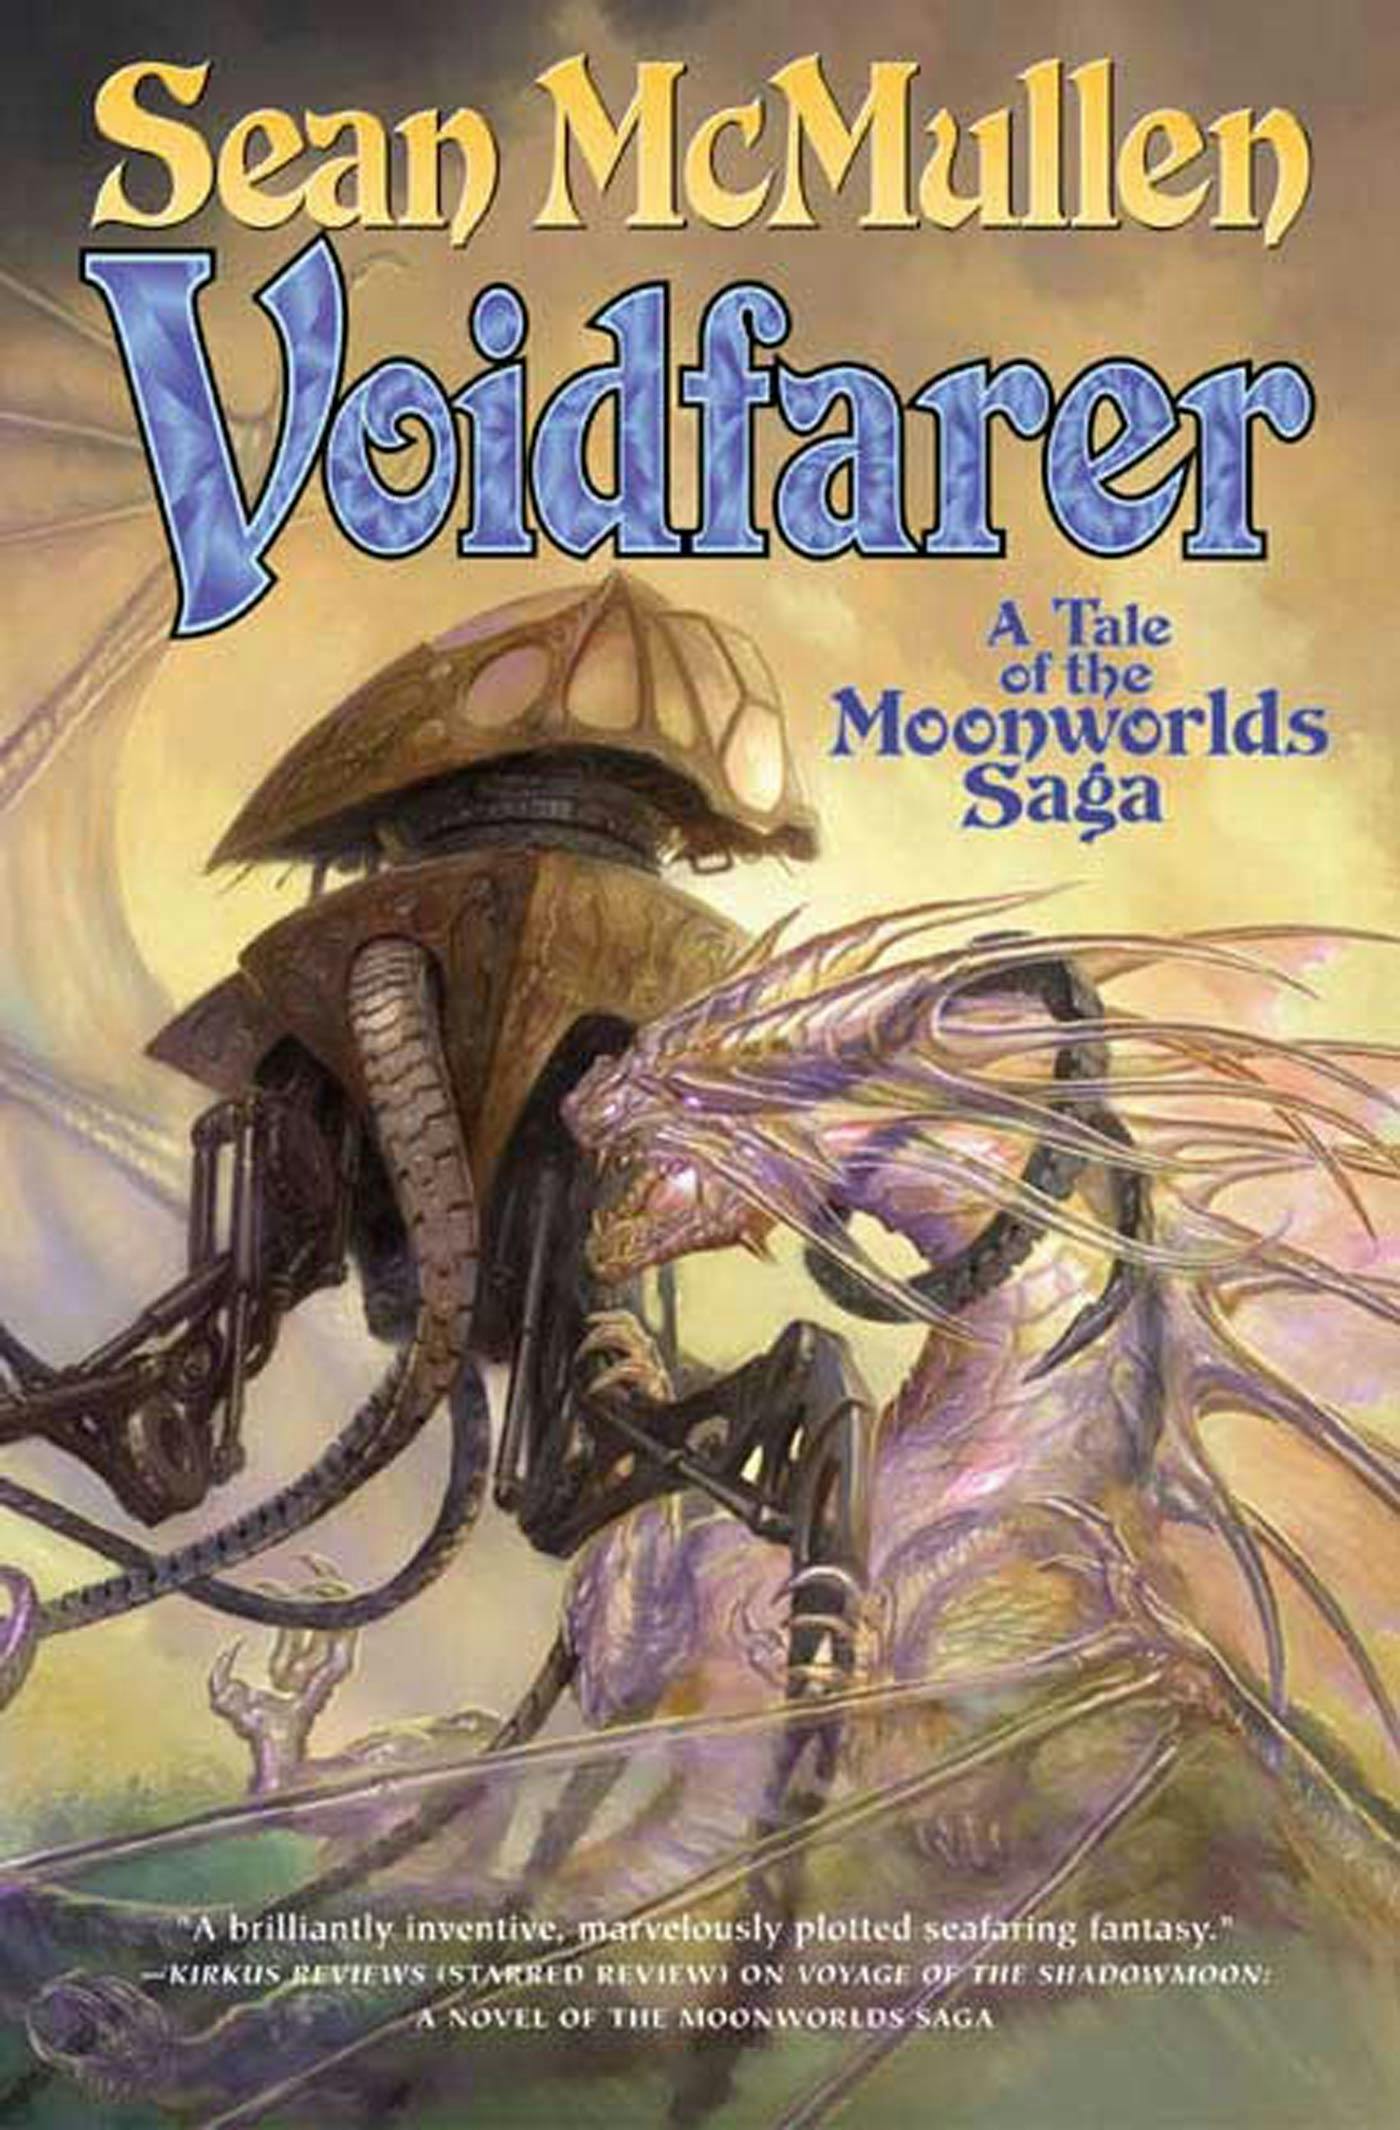 Cover for the book titled as: Voidfarer